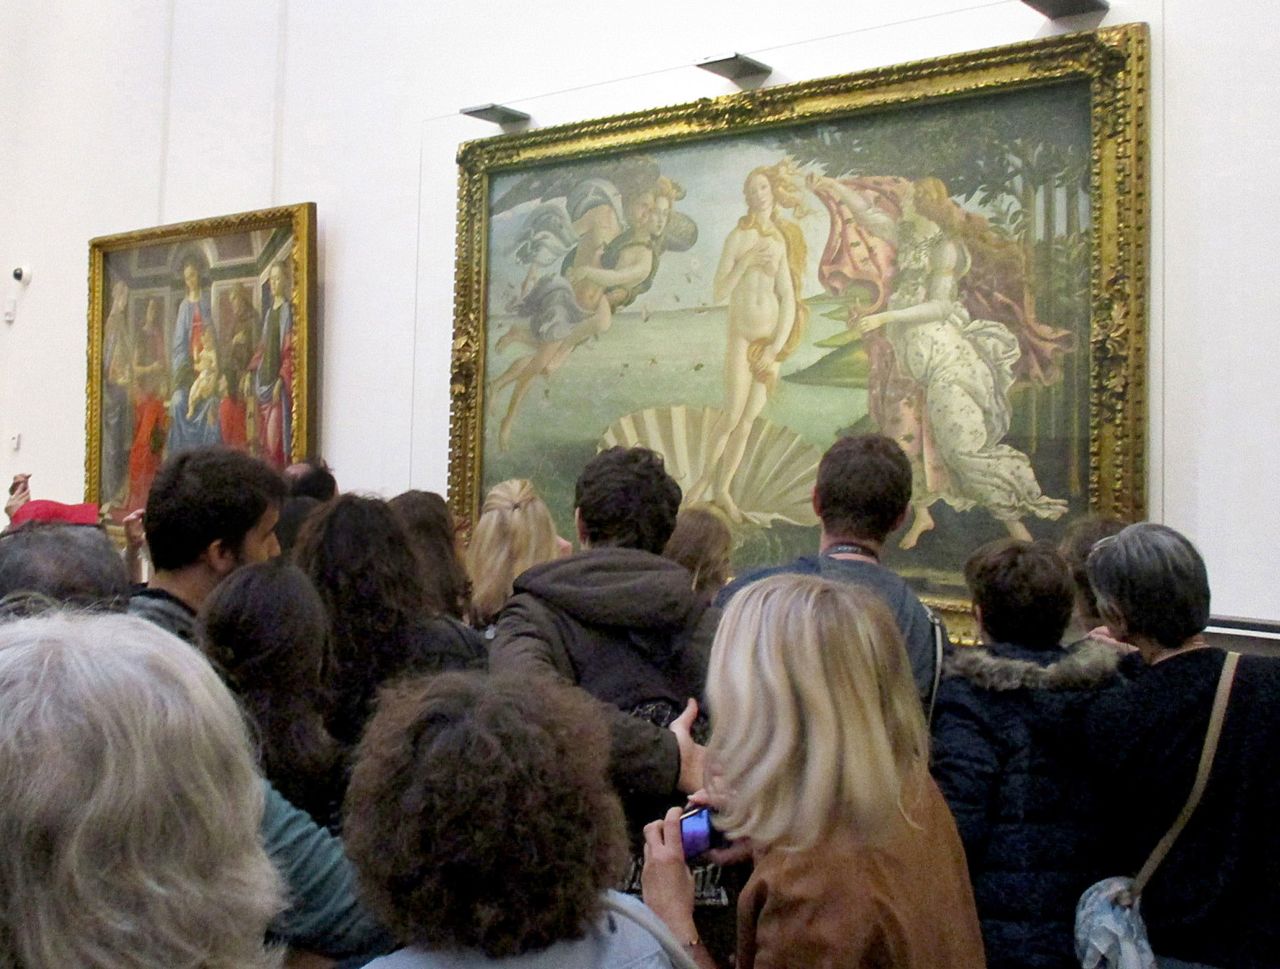 The crowds at the Uffizi Galleries for artworks like Botticelli's "Birth of Venus" were overwhelming pre-pandemic.